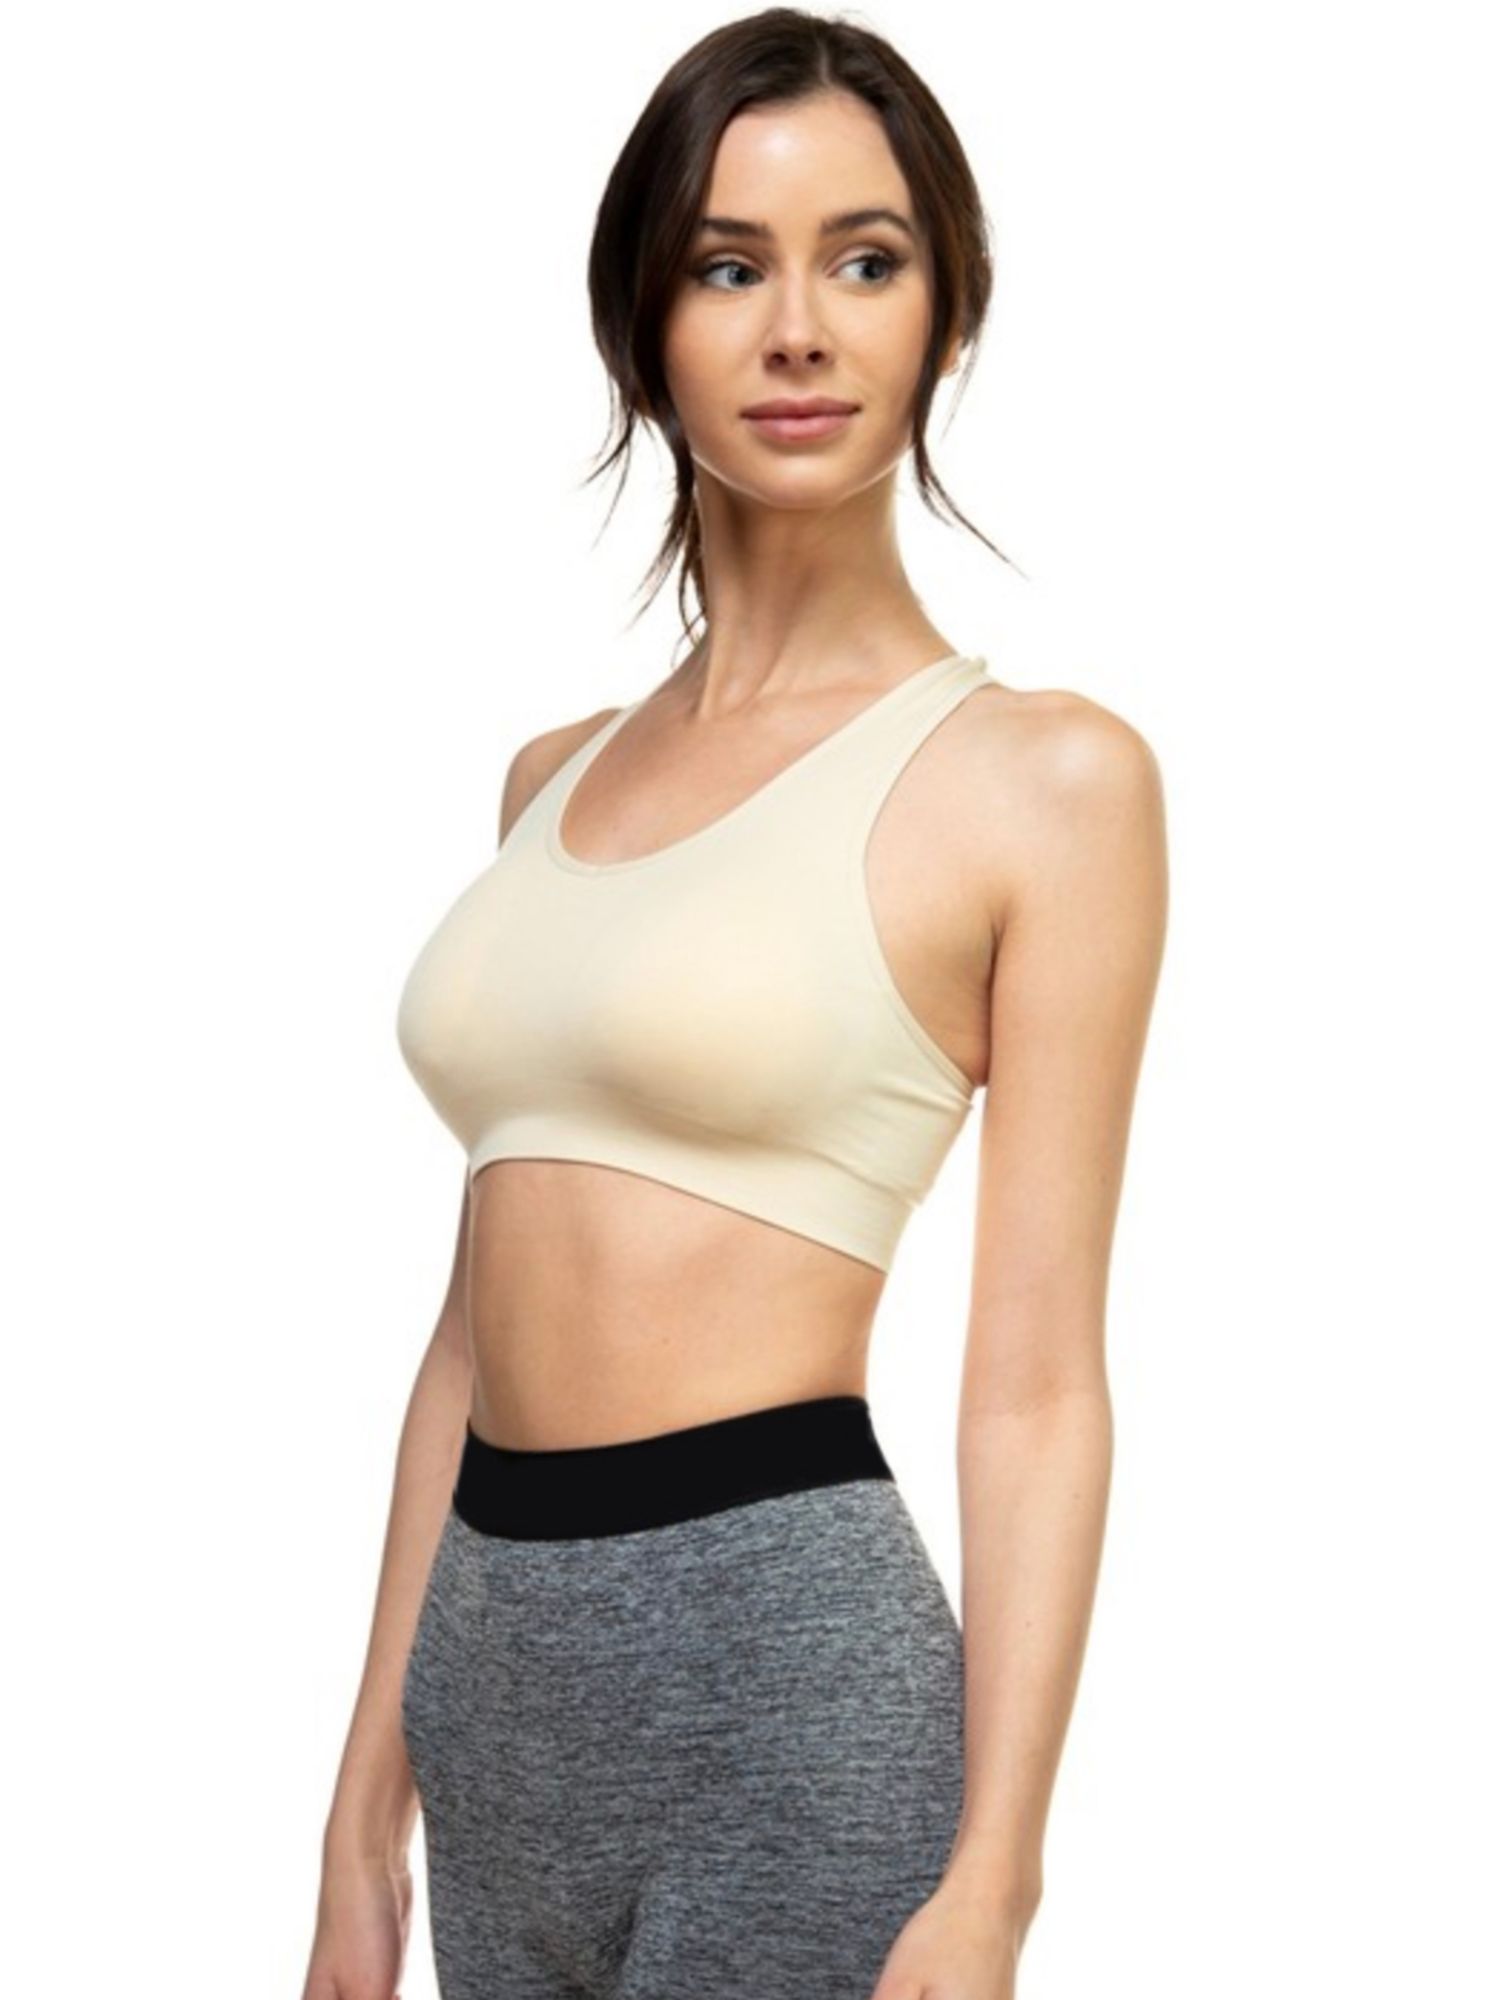 Fruit of the Loom Black/White/Gray Ruched Front Sports Bras -3